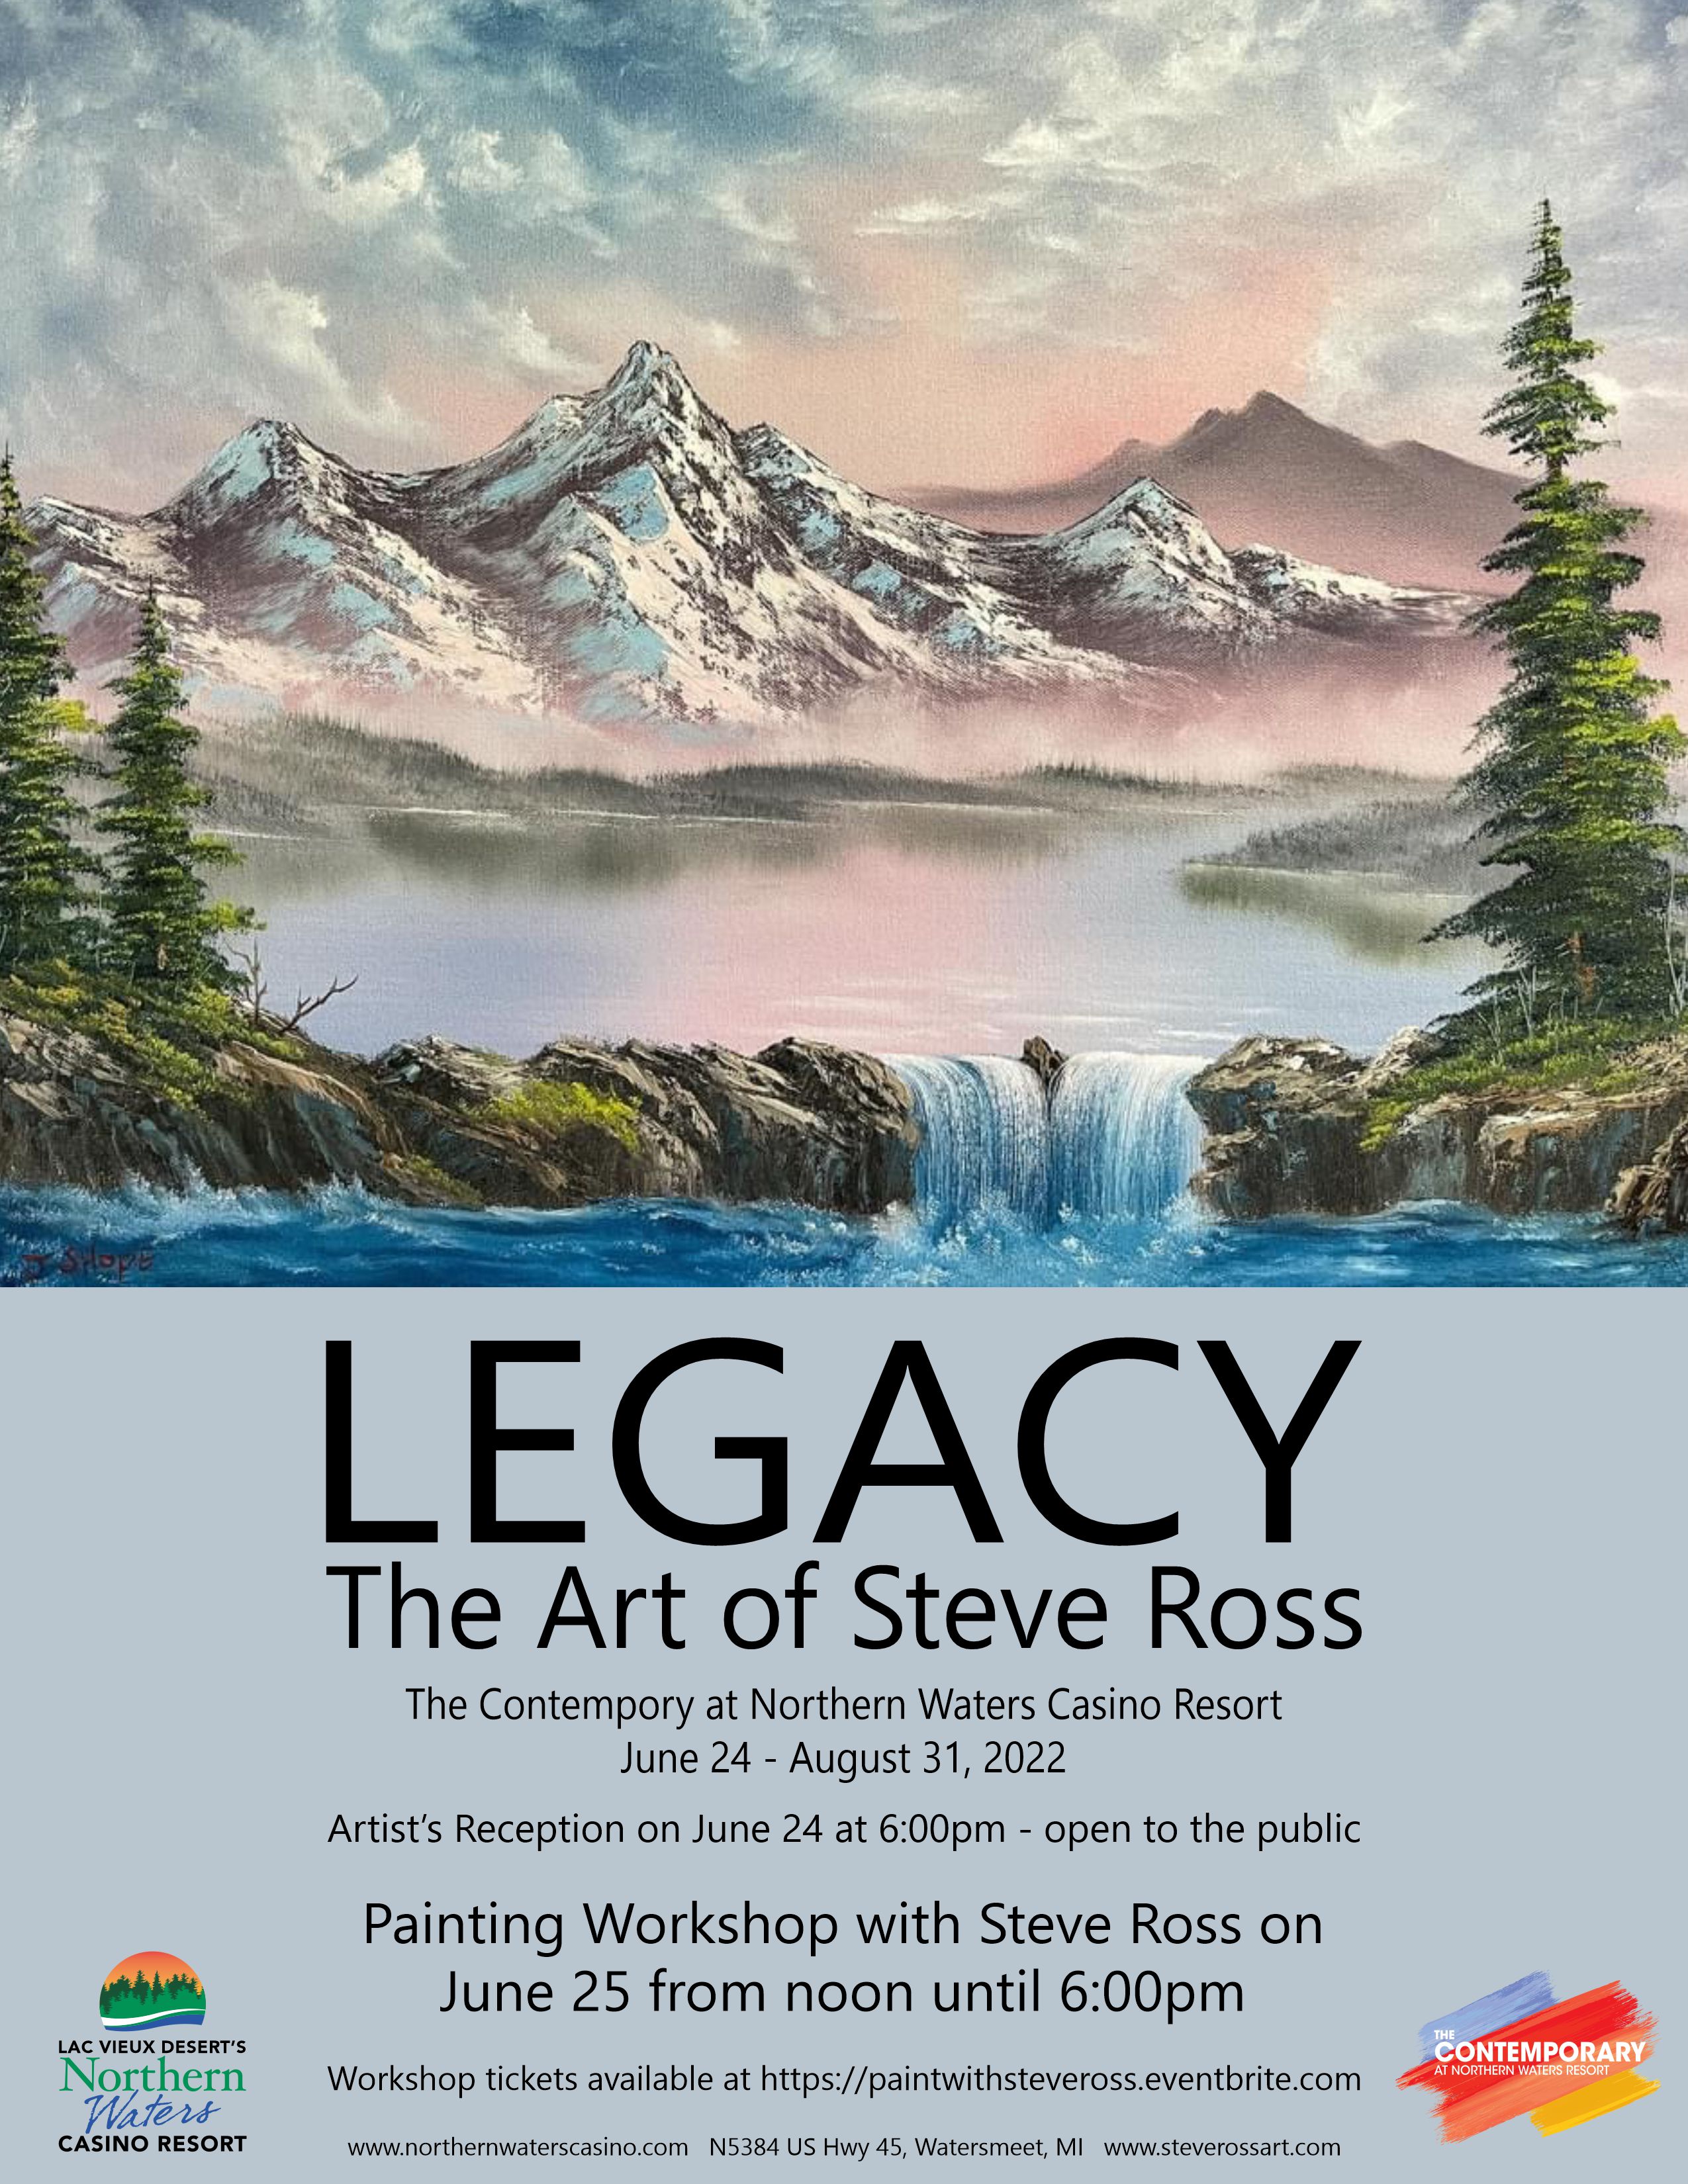 The Contemporary Gallery Presents "Legacy: The Art of Steve Ross"